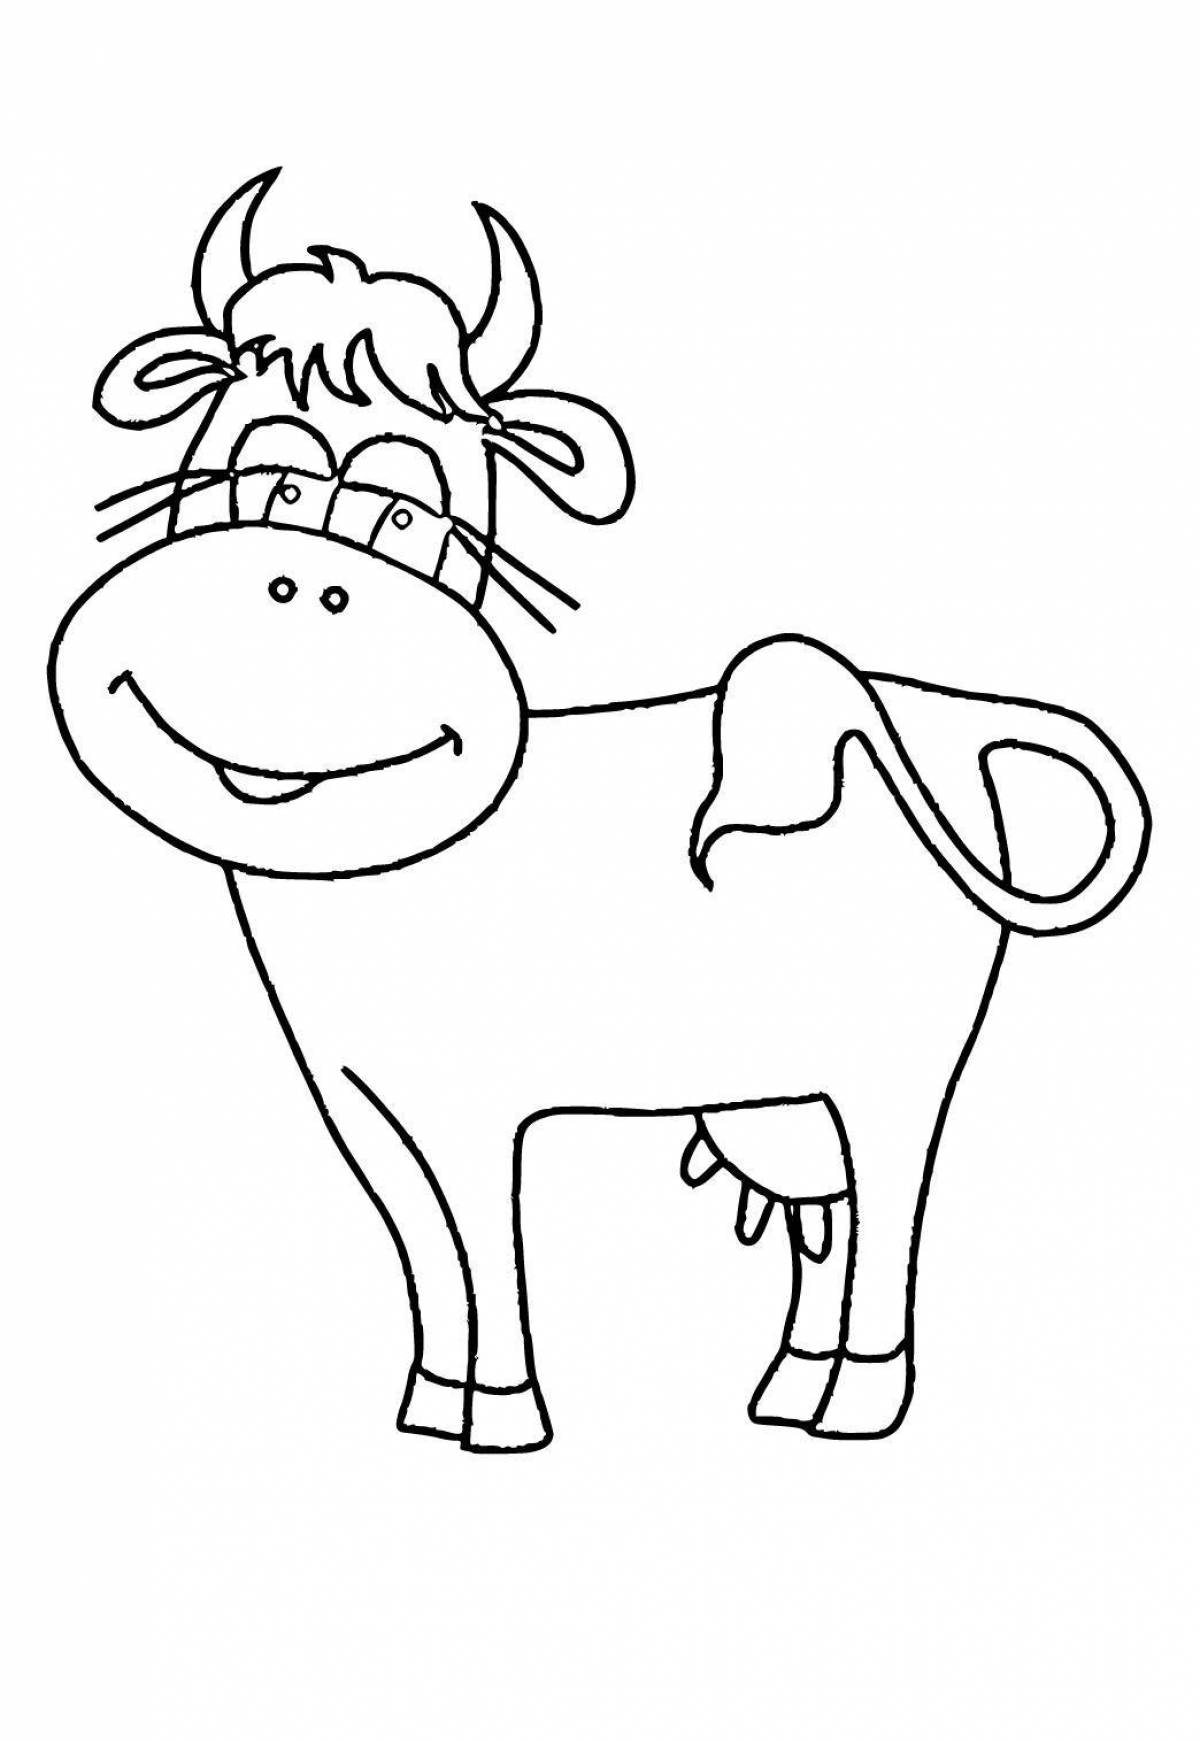 Cow stimulating coloring book for preschoolers